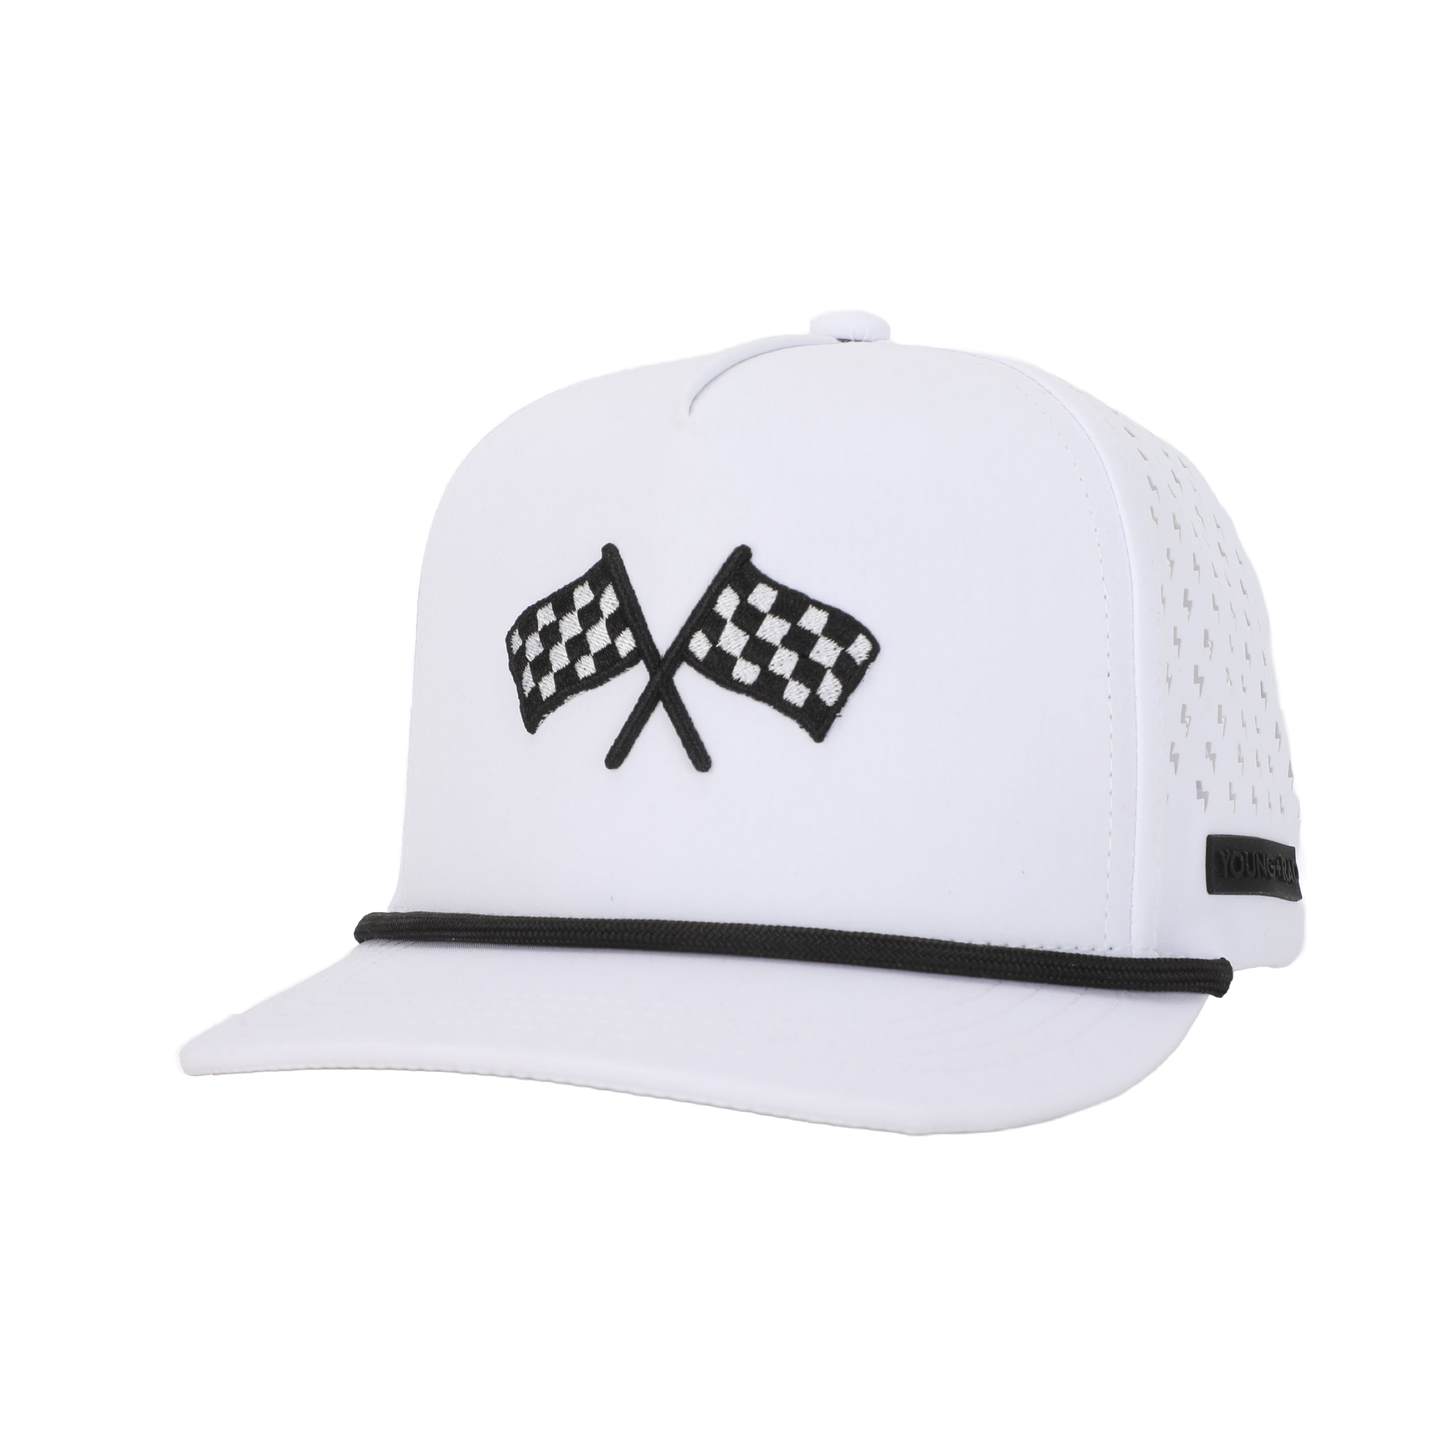 Finish Line Snapback -Water Resistant